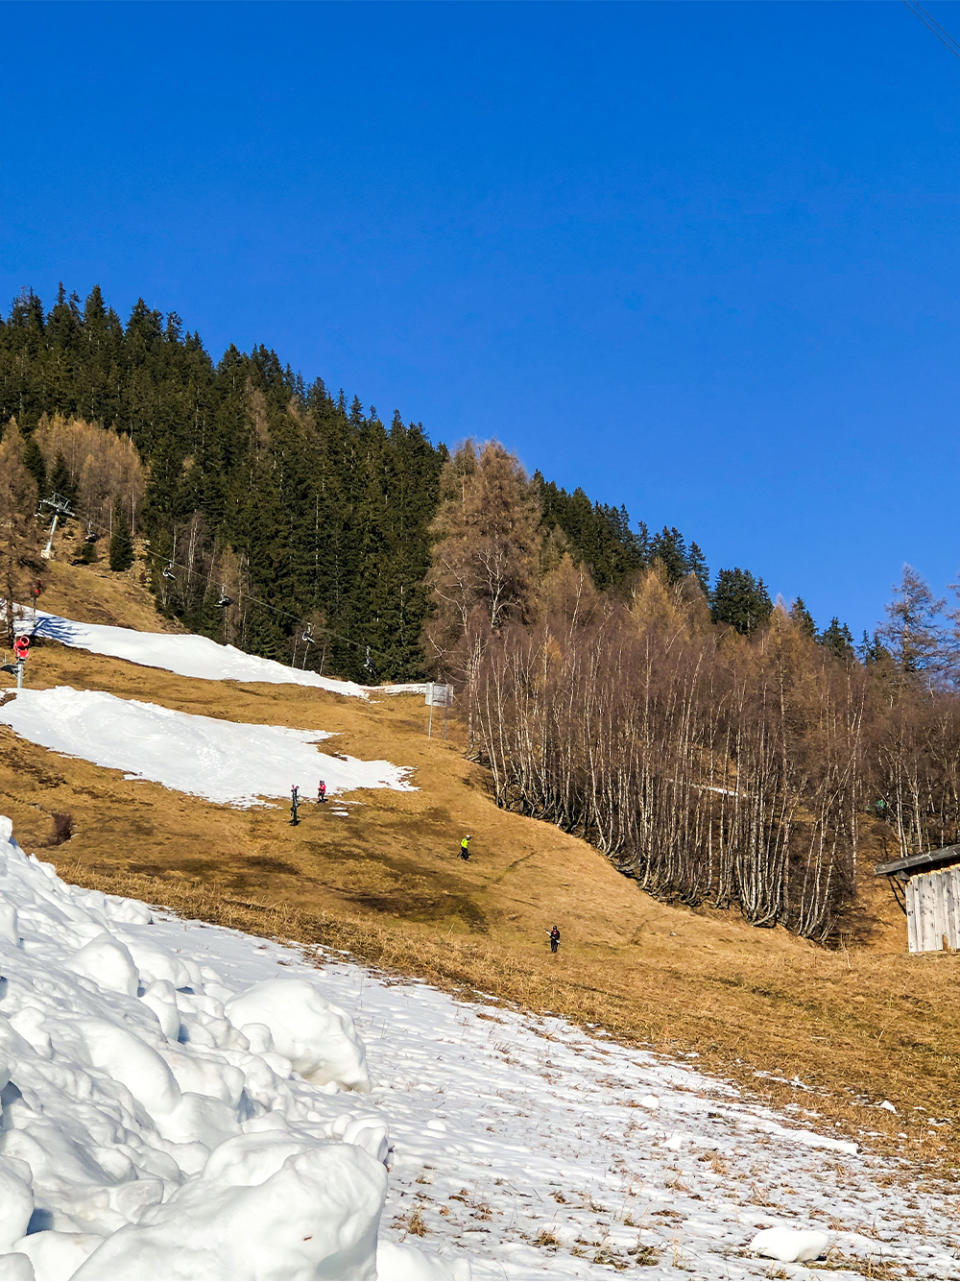 Snowless ski runs like this one in the Alps have become a common sight this year.